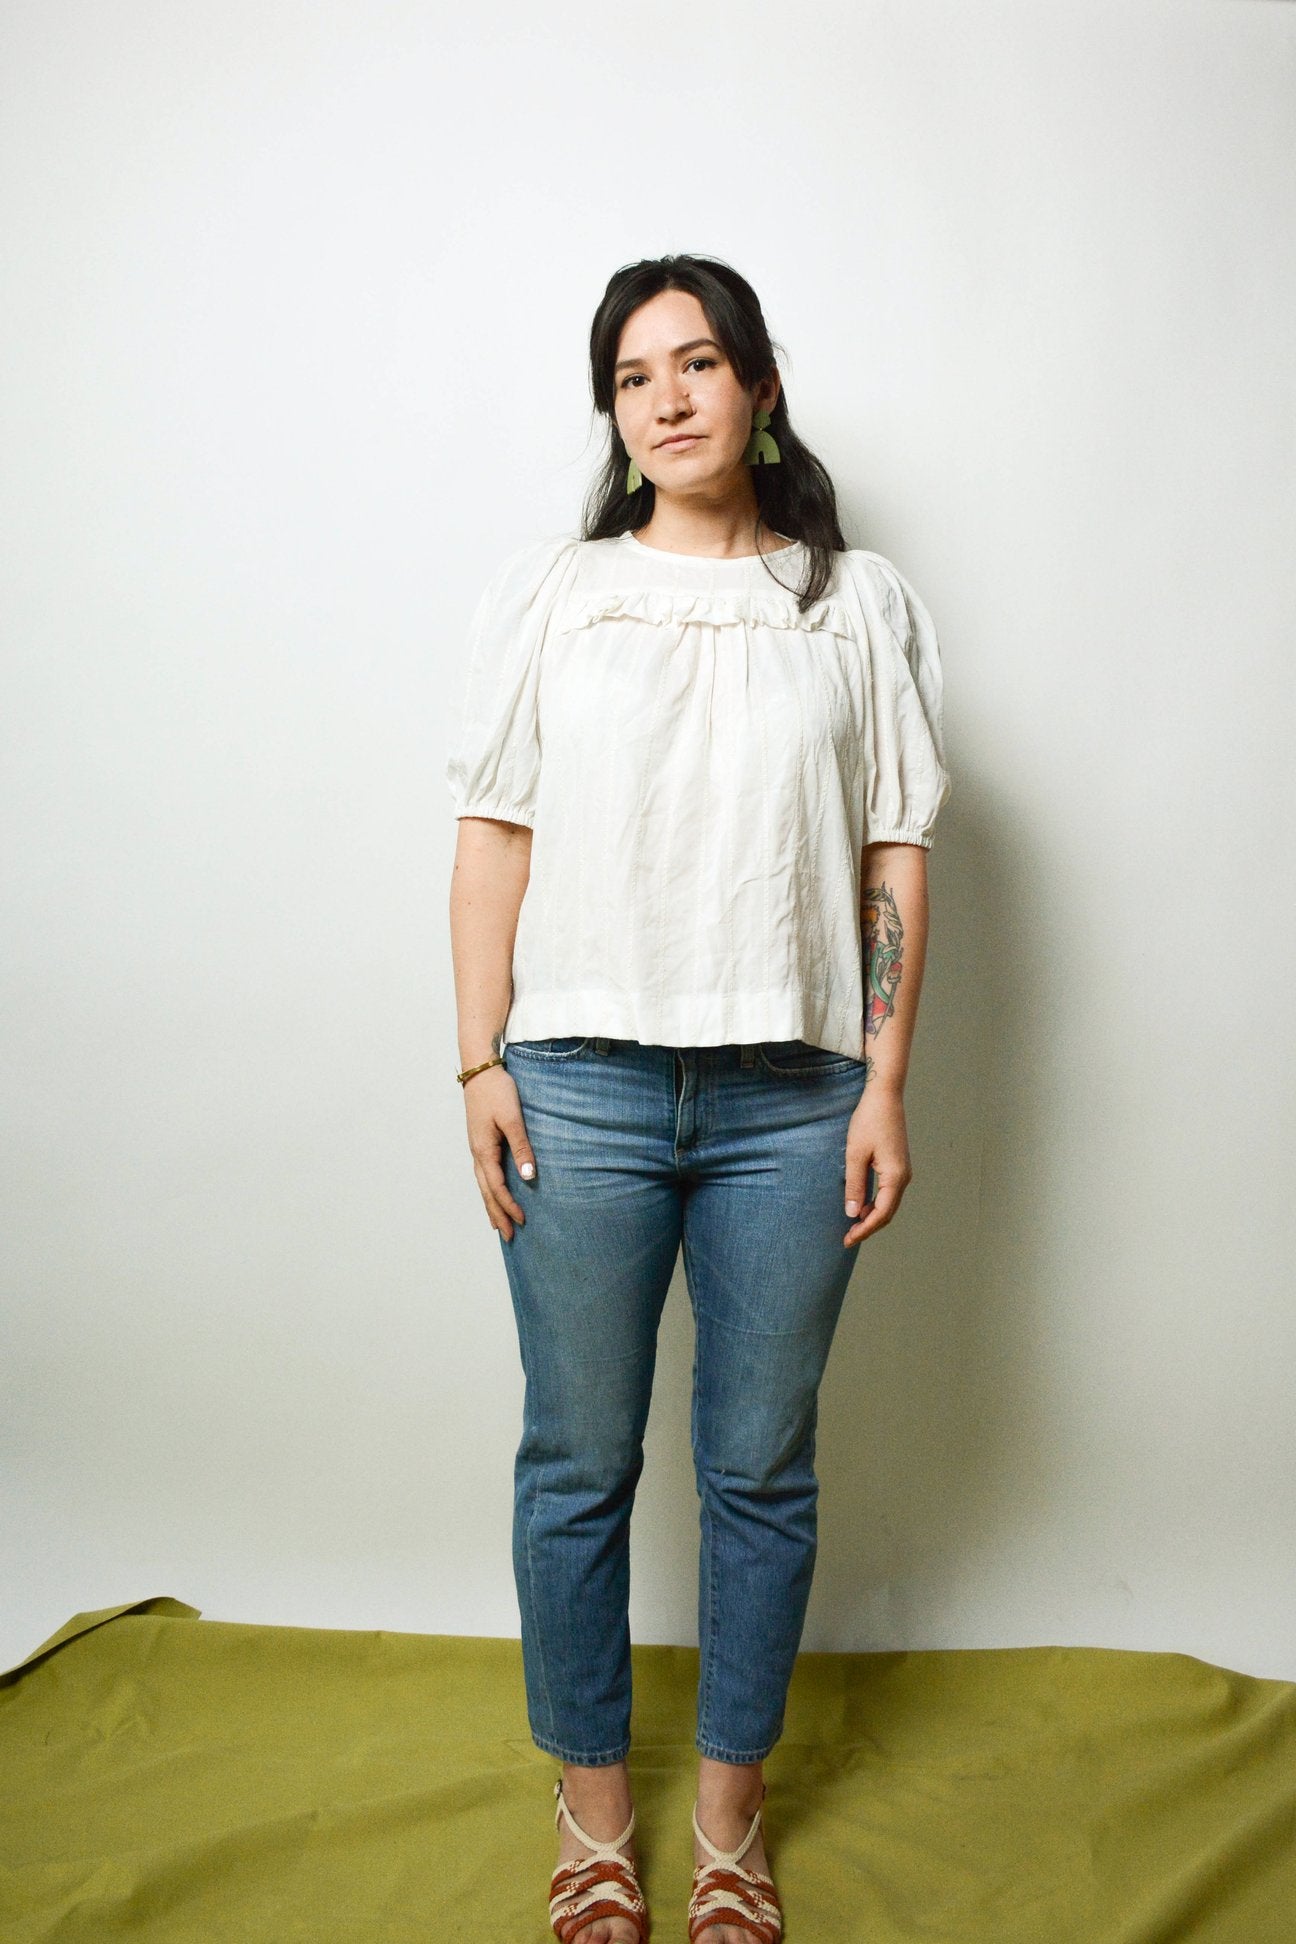 FRIDAY Pattern Co - the Sagebrush Top Sewing Pattern